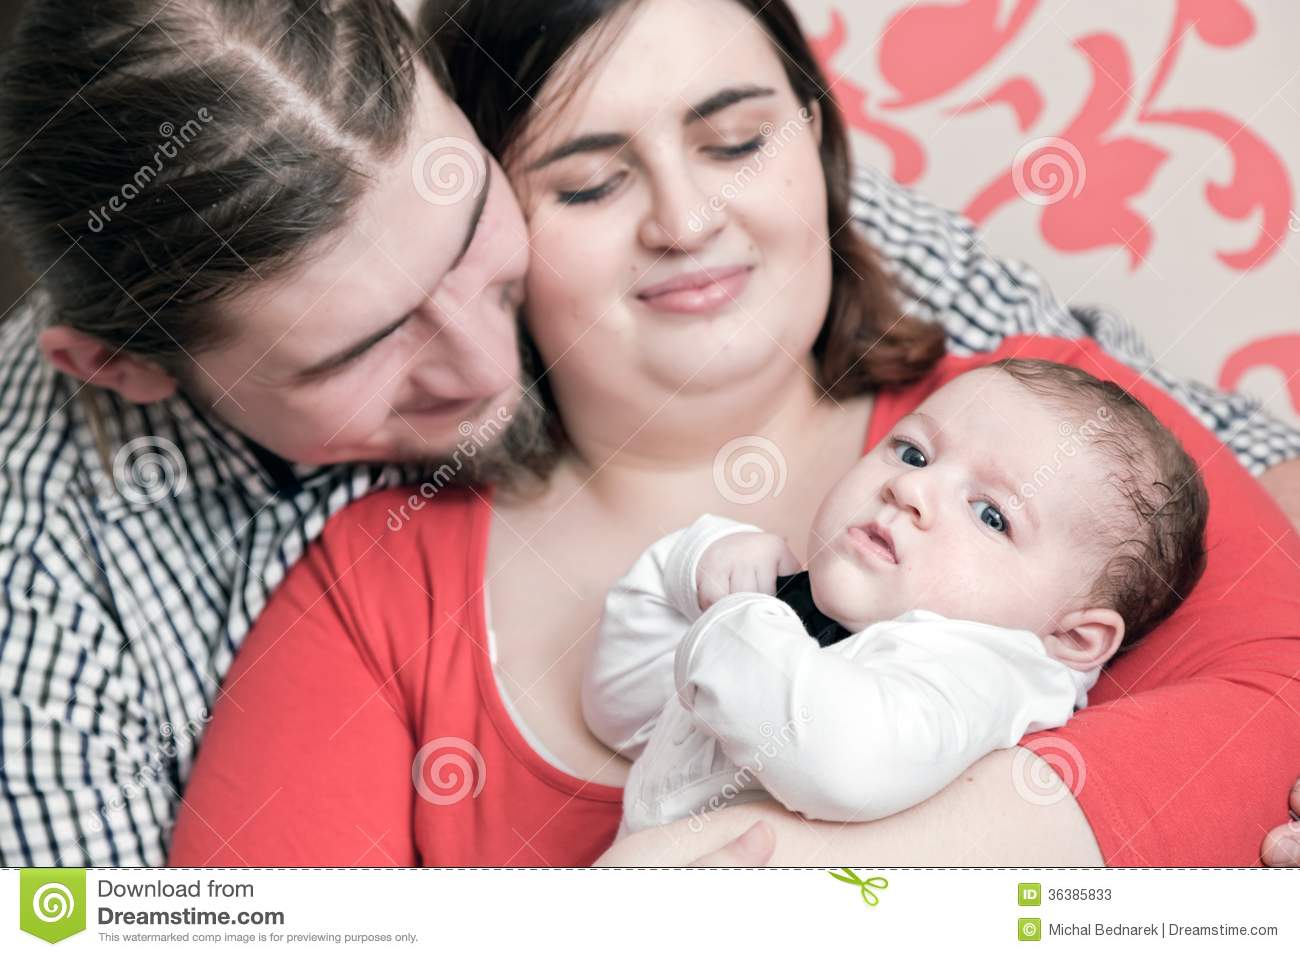     With Their Young Baby Cuddling Together  Happy Young Family Portrait